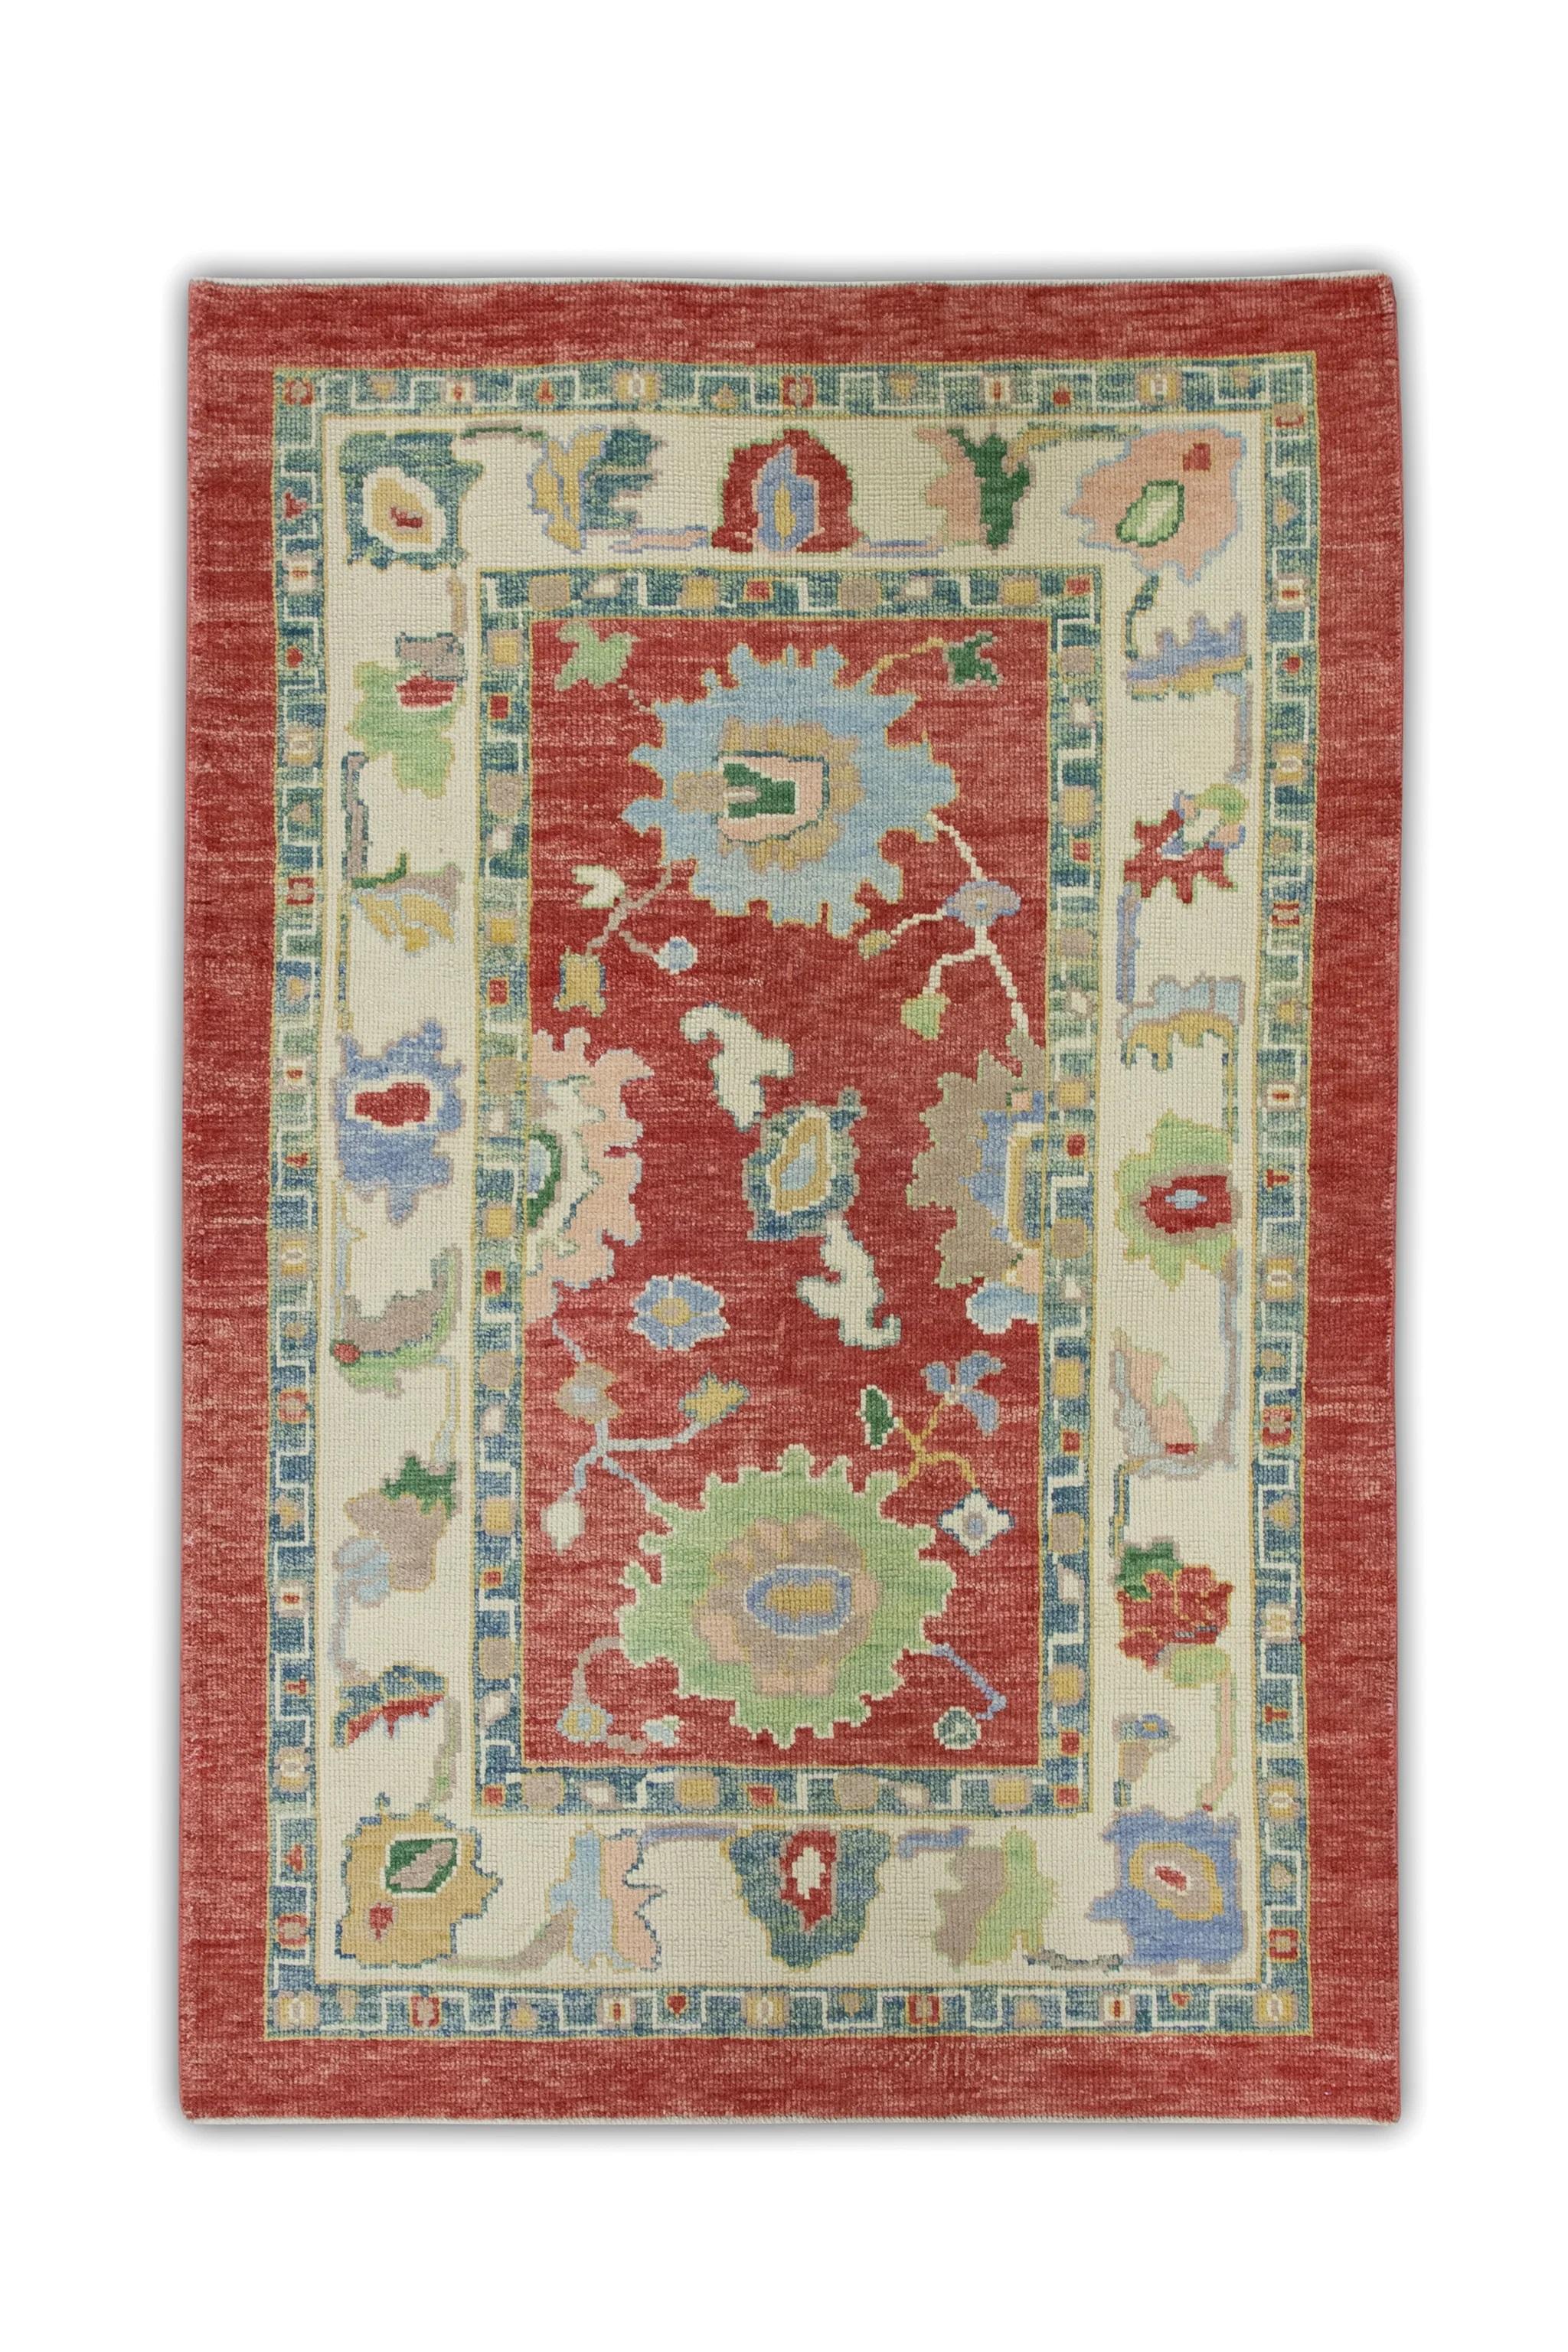 Contemporary Red Handwoven Wool Turkish Oushak Rug in Blue & Green Floral Design 4'3